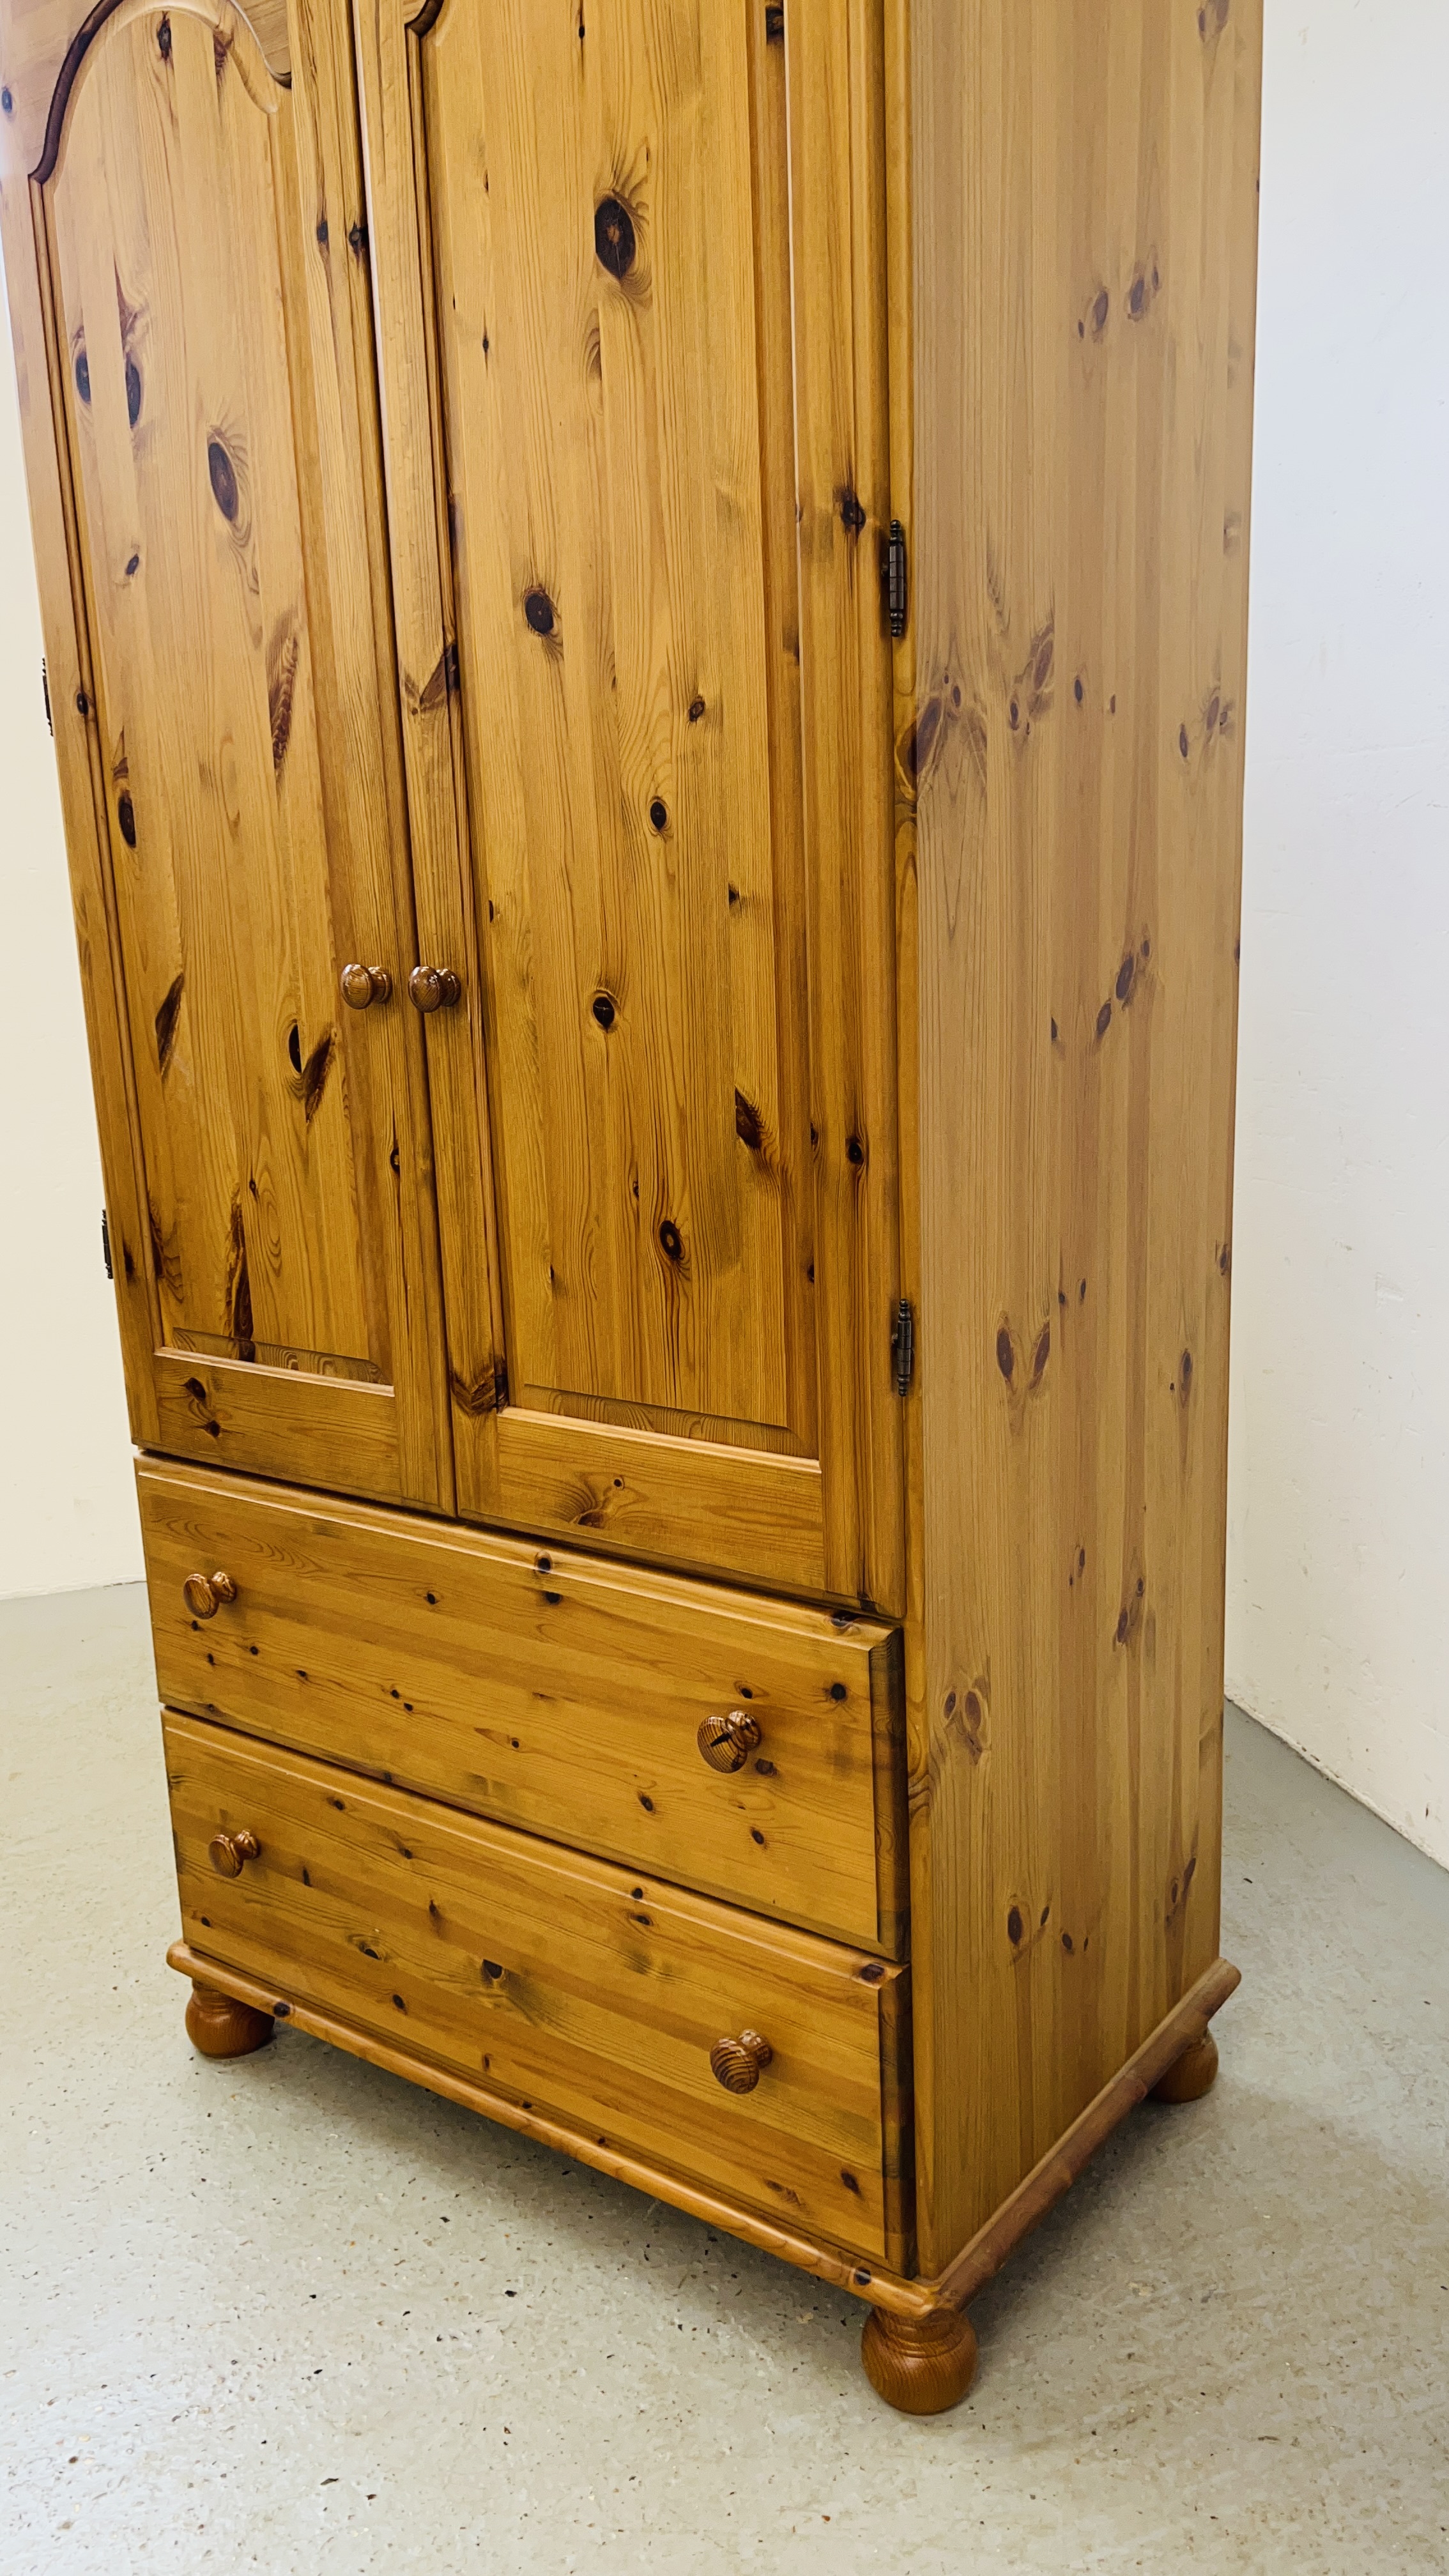 A GOOD QUALITY HONEY PINE TWO DOOR WARDROBE WITH TWO DRAWER BASE WIDTH 93CM. DEPTH 56CM. - Image 3 of 10